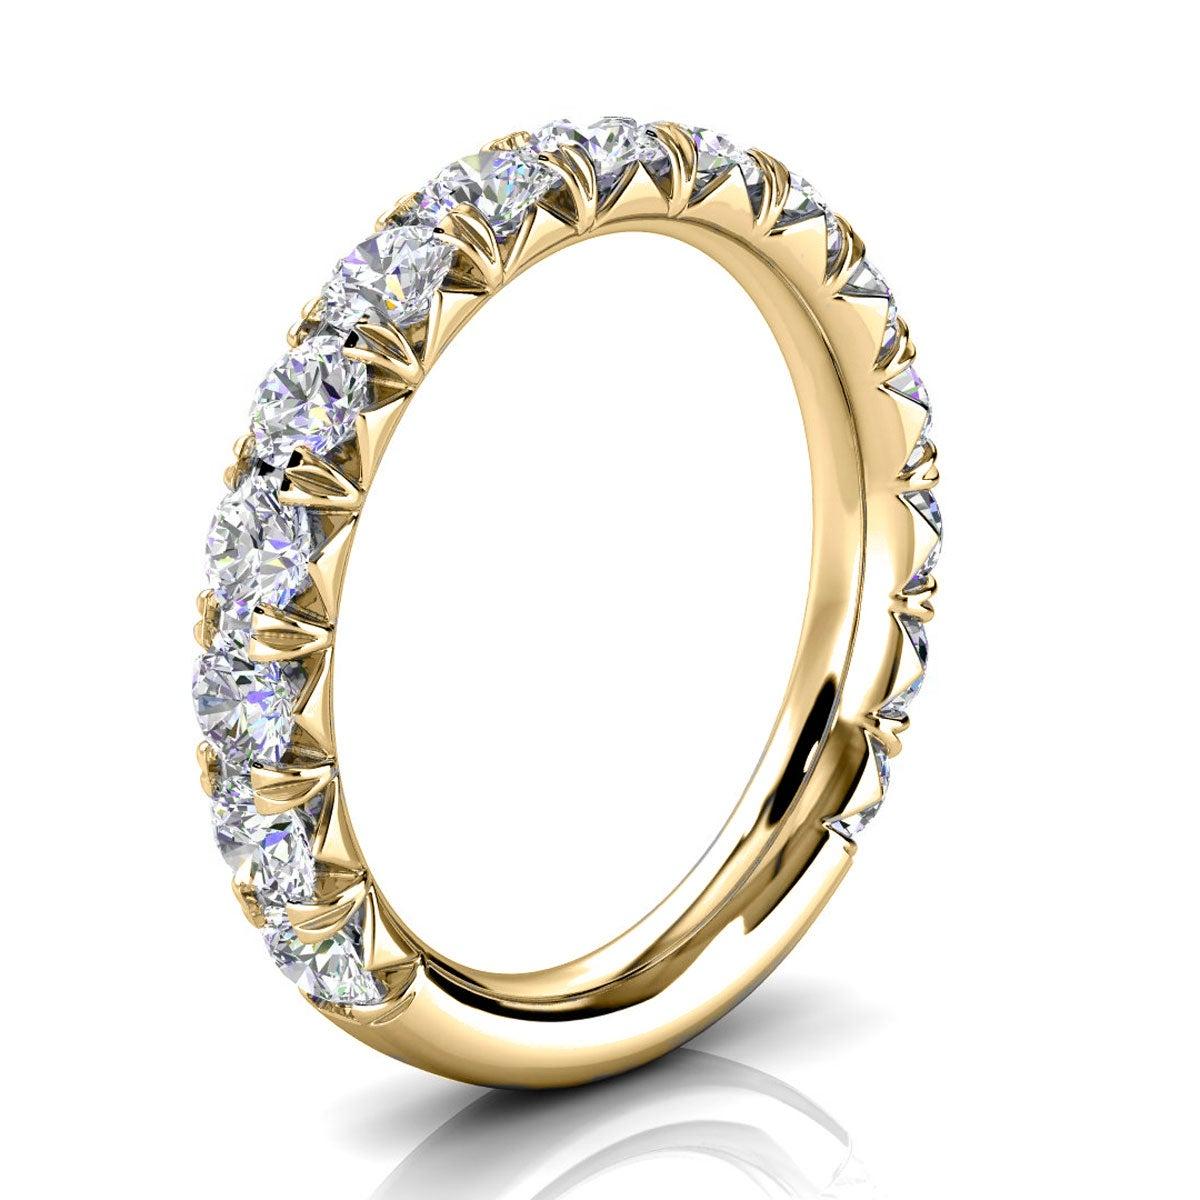 For Sale:  18k Yellow Gold GIA French Pave Diamond Ring '1 1/2 Ct. Tw' 2